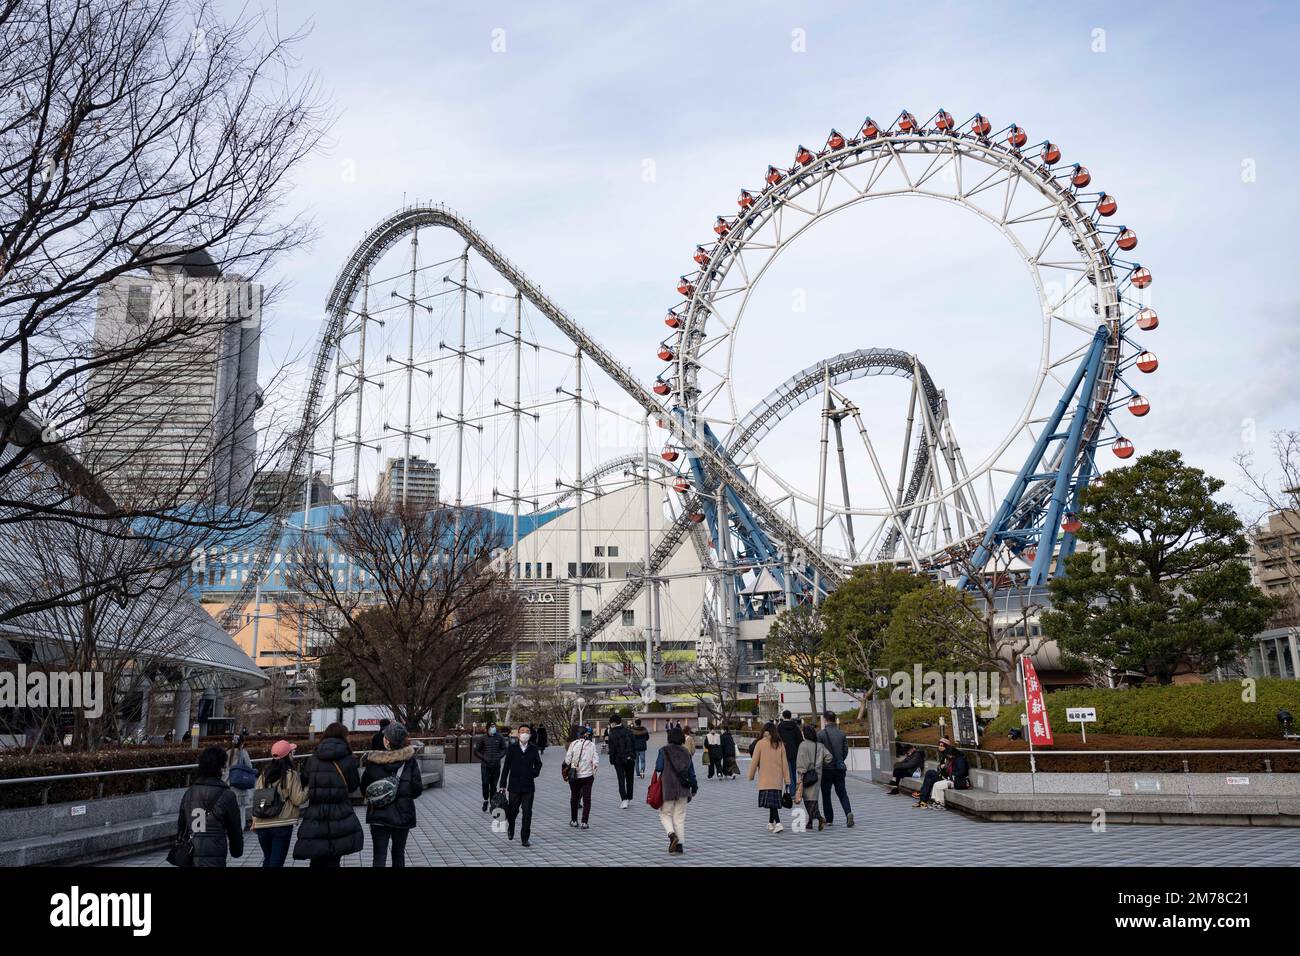 Tokyo, Japan. 6th Jan, 2023. Rollercoasters at the Tokyo Dome City amusement park.The Tokyo Dome is a multi-purpose stadium dome roofed indoor stadium. It was completed in 1988 and has a capacity of 55,000 people. The dome has a retractable roof, making it suitable for hosting both indoor and outdoor events. It is the home of the Yomiuri Giants, a professional baseball team in the Nippon Professional Baseball, and is also used for concerts, exhibitions, and other sporting events. It is a popular tourist attraction and offers a variety of amenities in Tokyo Dome City, including restaurants Stock Photo